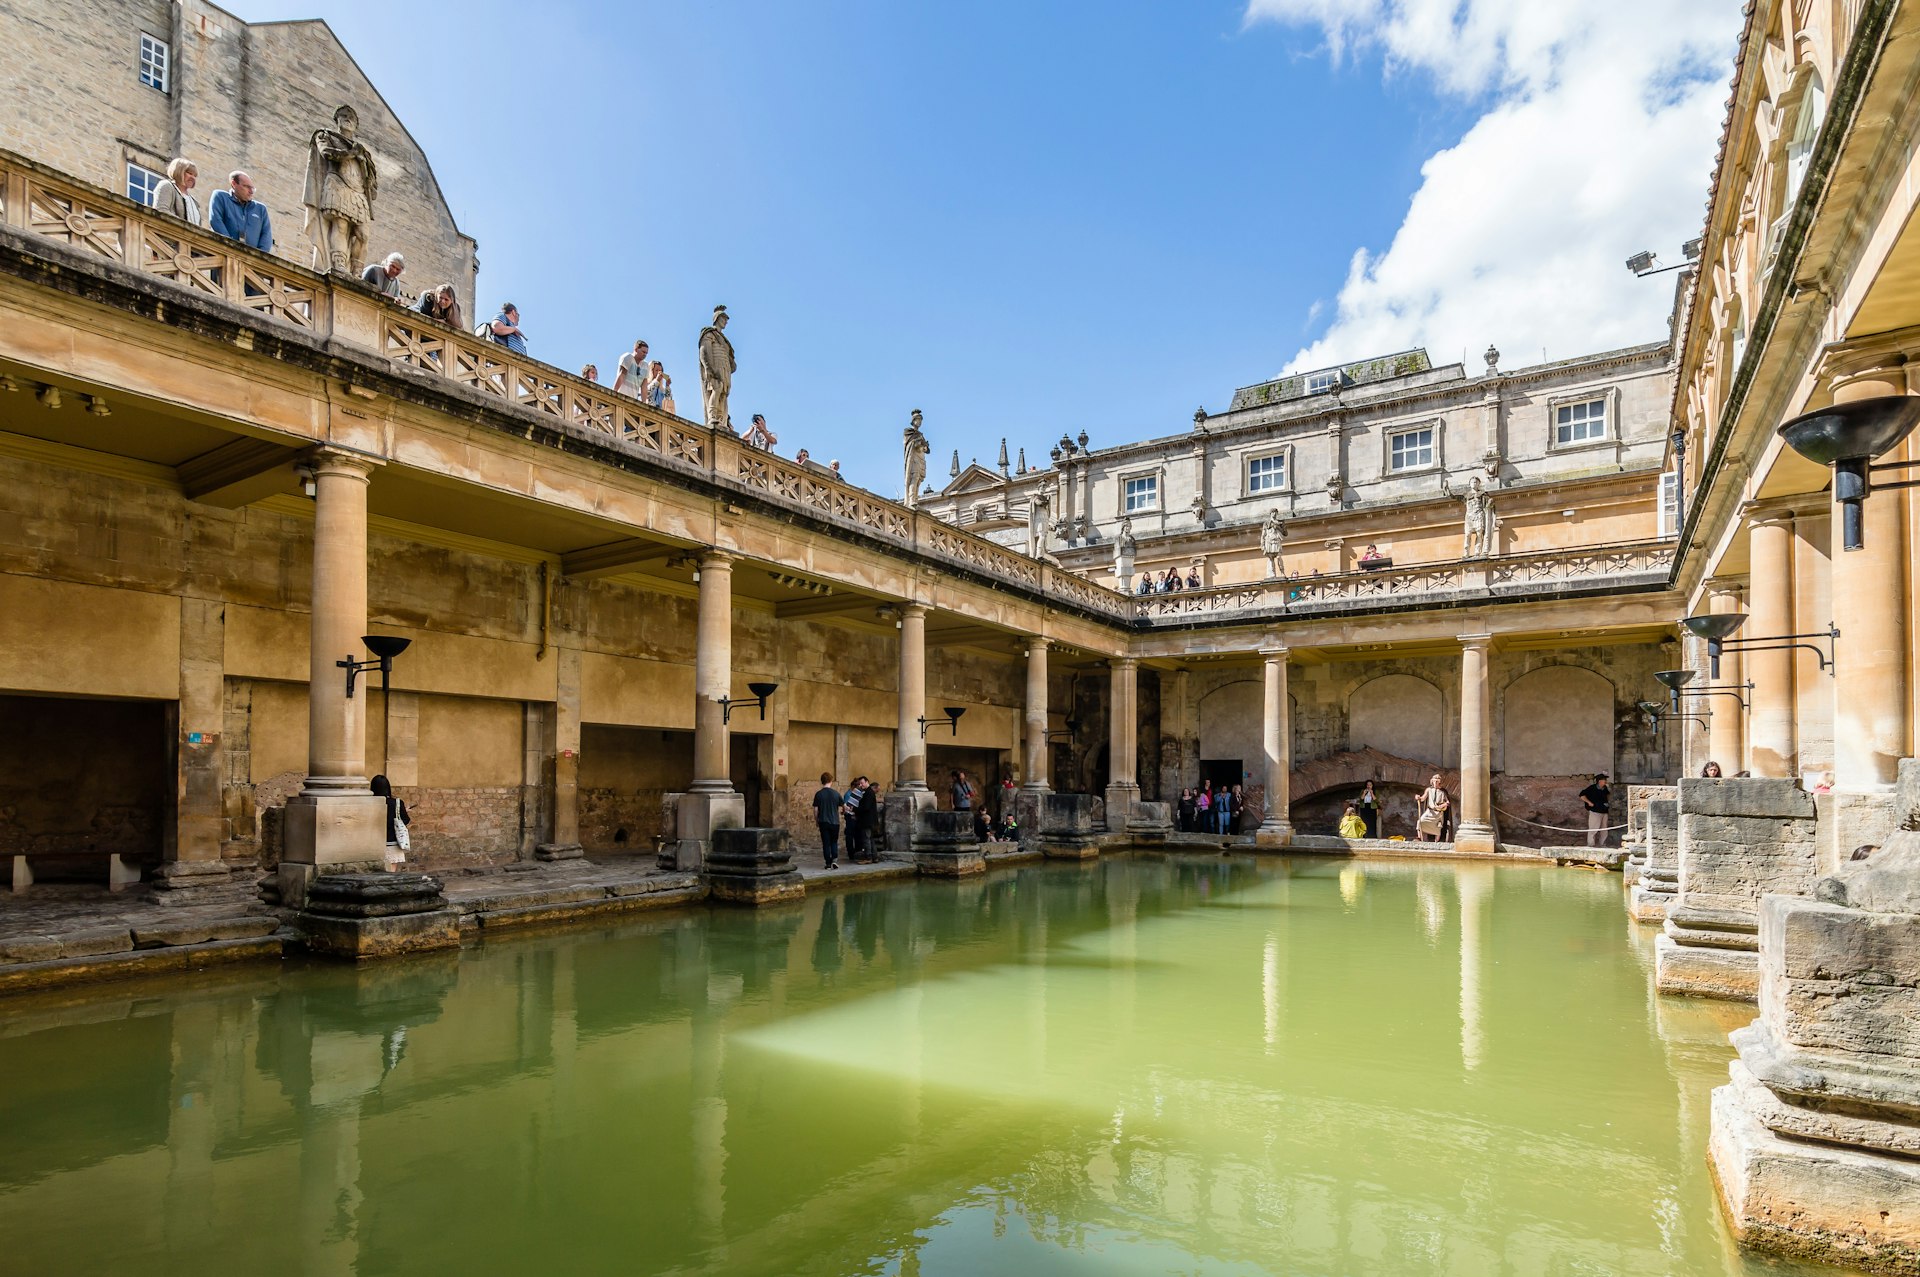 Beautiful Bath was setting in Austen's novels and a place where the writer herself lived ©Juan Jimenez / EyeEm / Getty Images